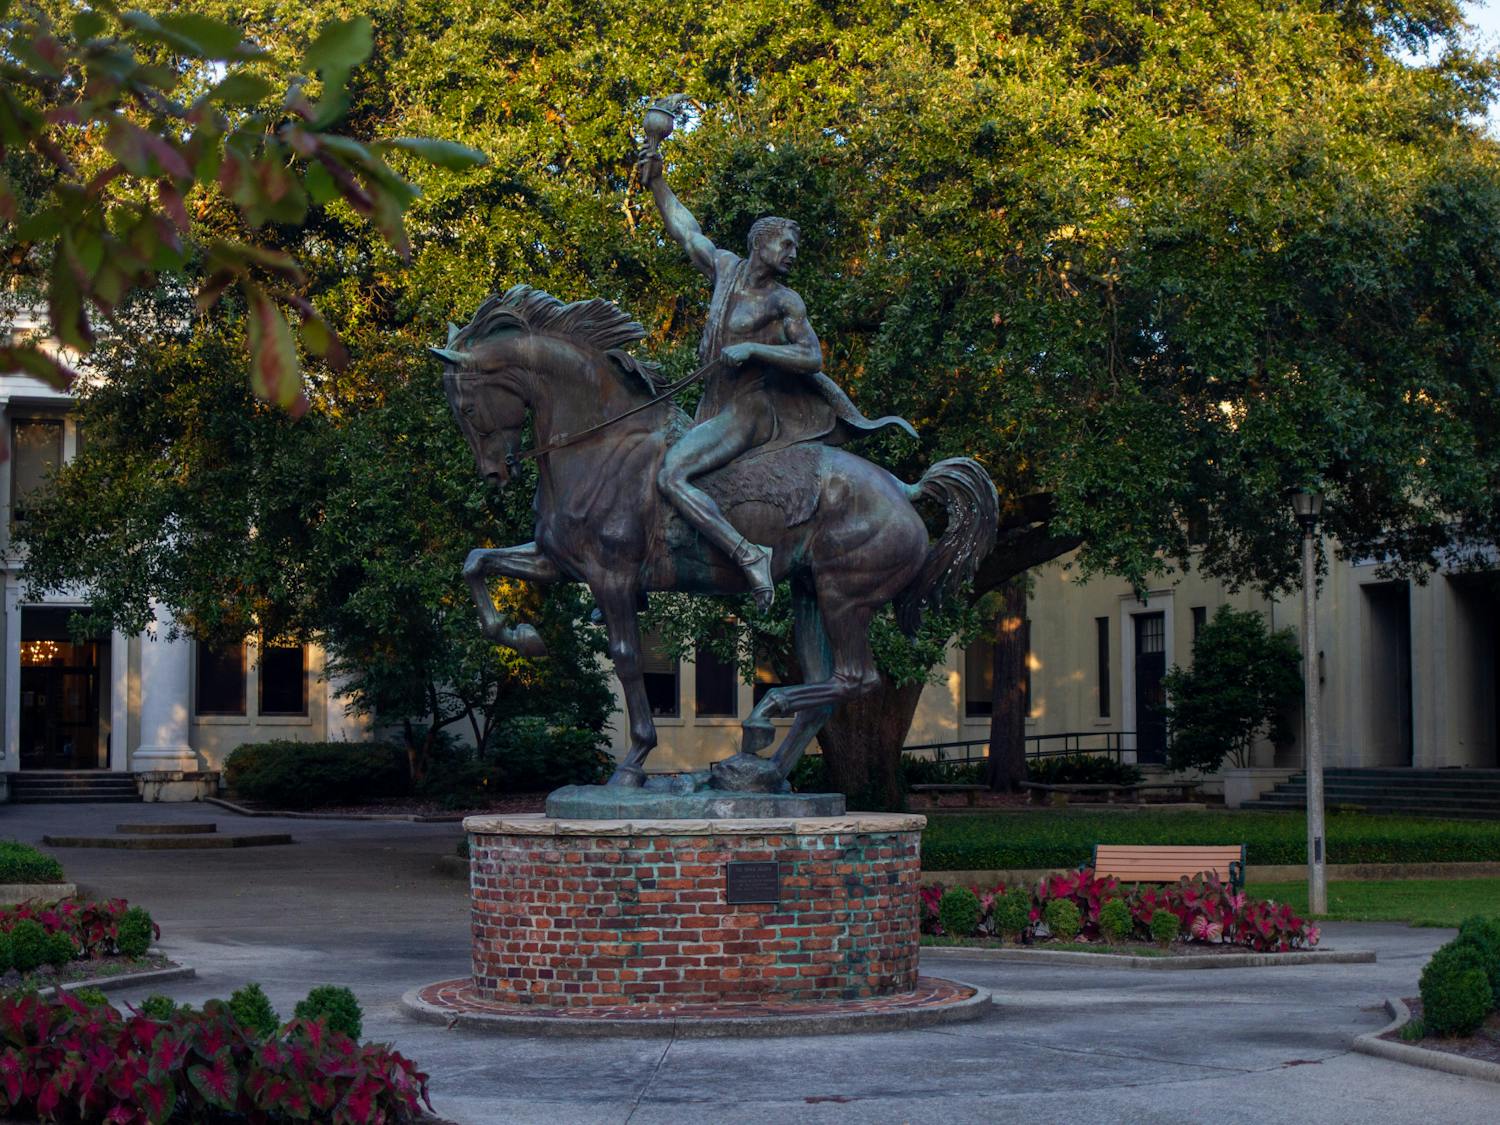 “The Torch Bearer” by Anna Hyatt Huntington stands in front of Wardlaw College on Sept. 12, 2022. Wardlaw College serves as the home of USC's College of Education.